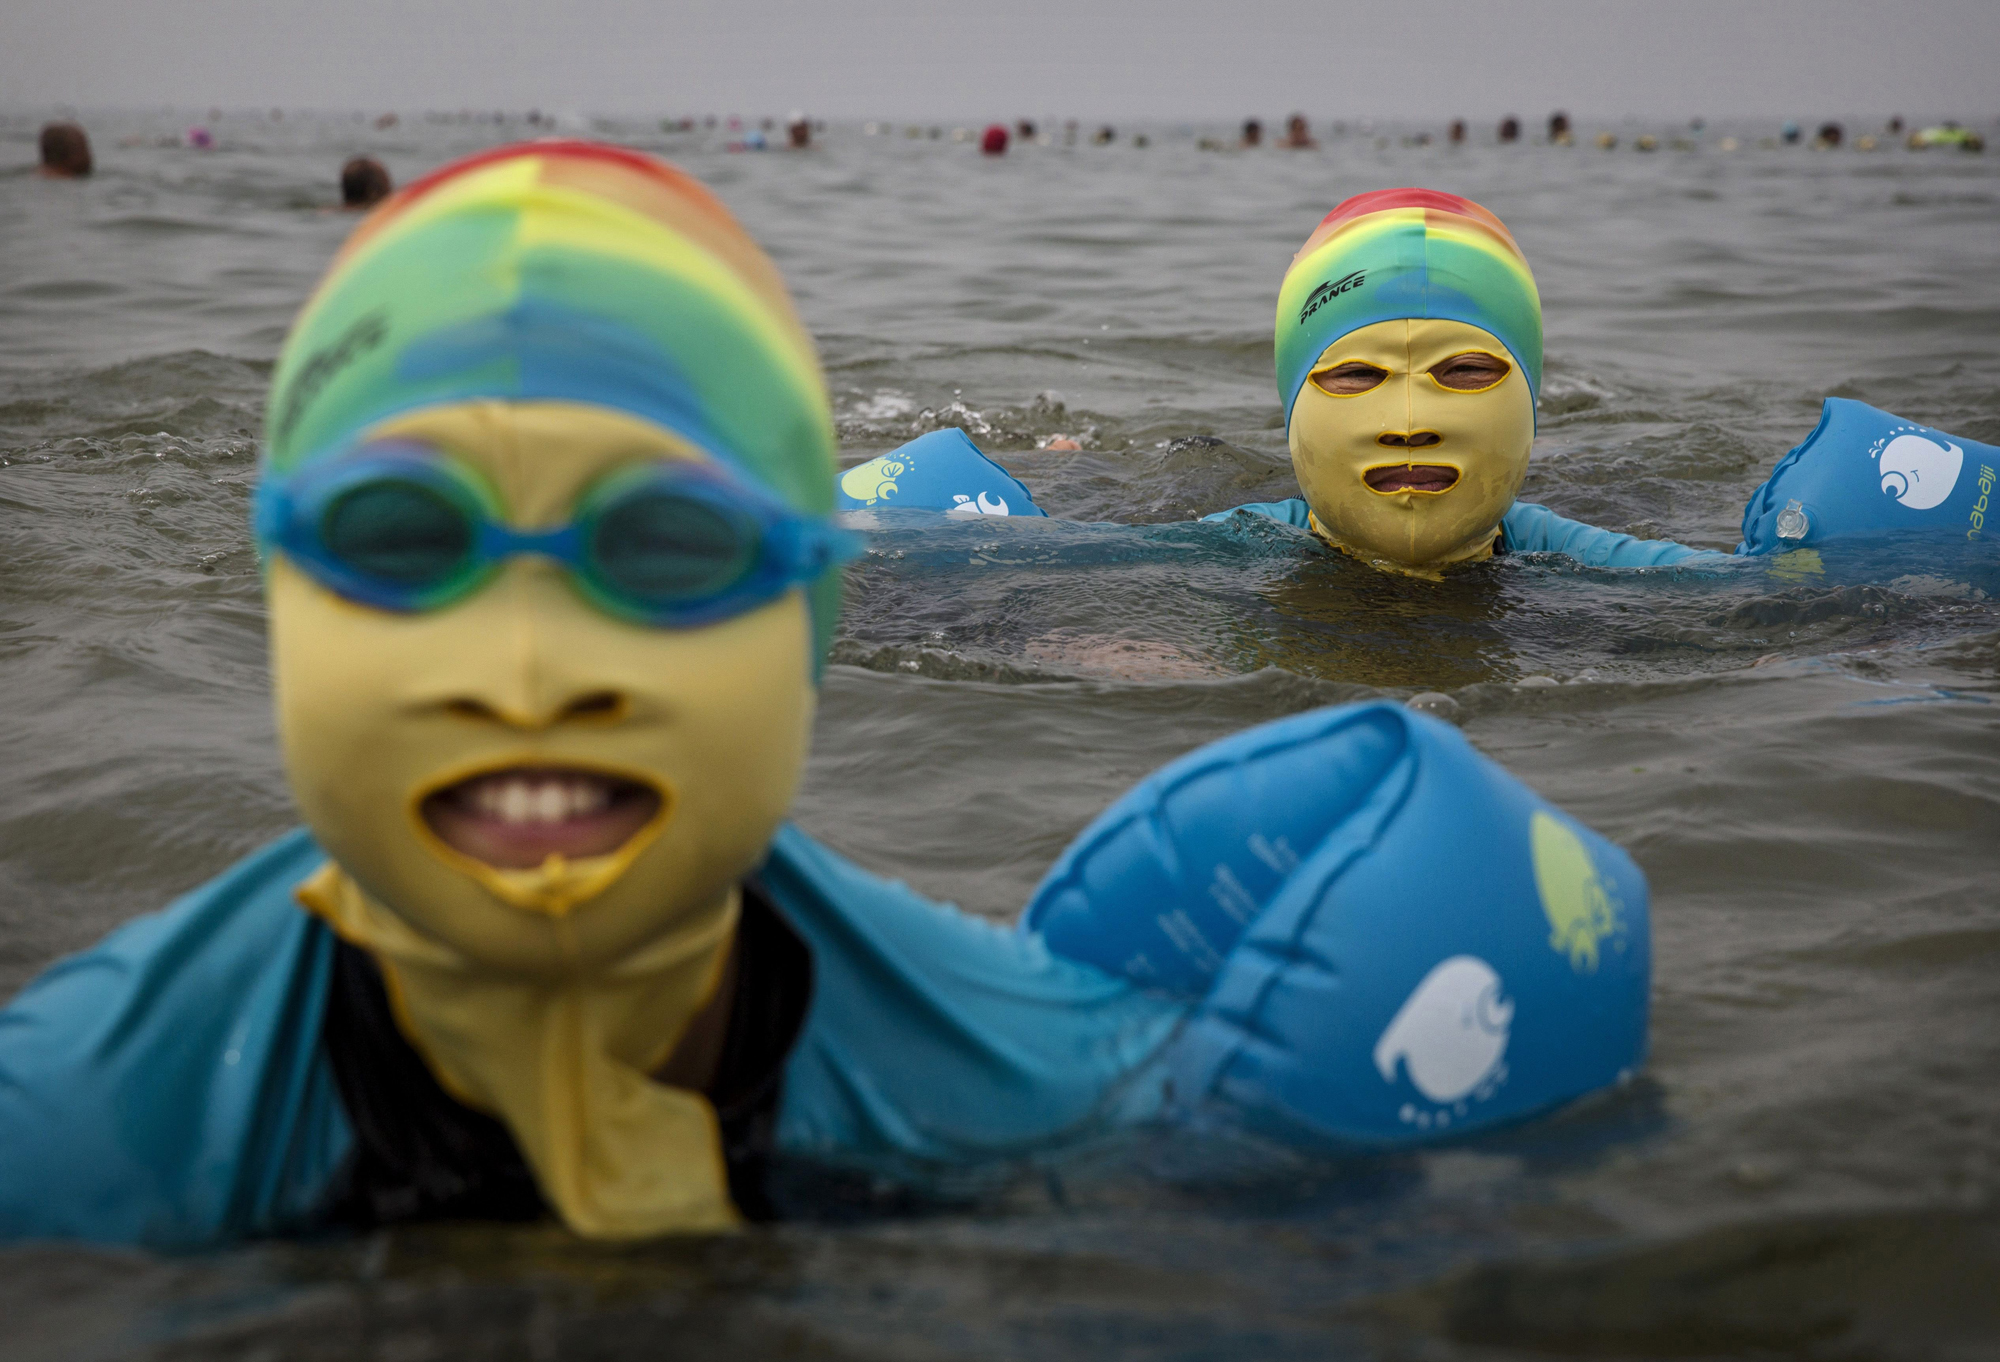 A woman and her daughter wear facekinis while swimming on Aug. 22, 2014, in the Yellow Sea in Qingdao.